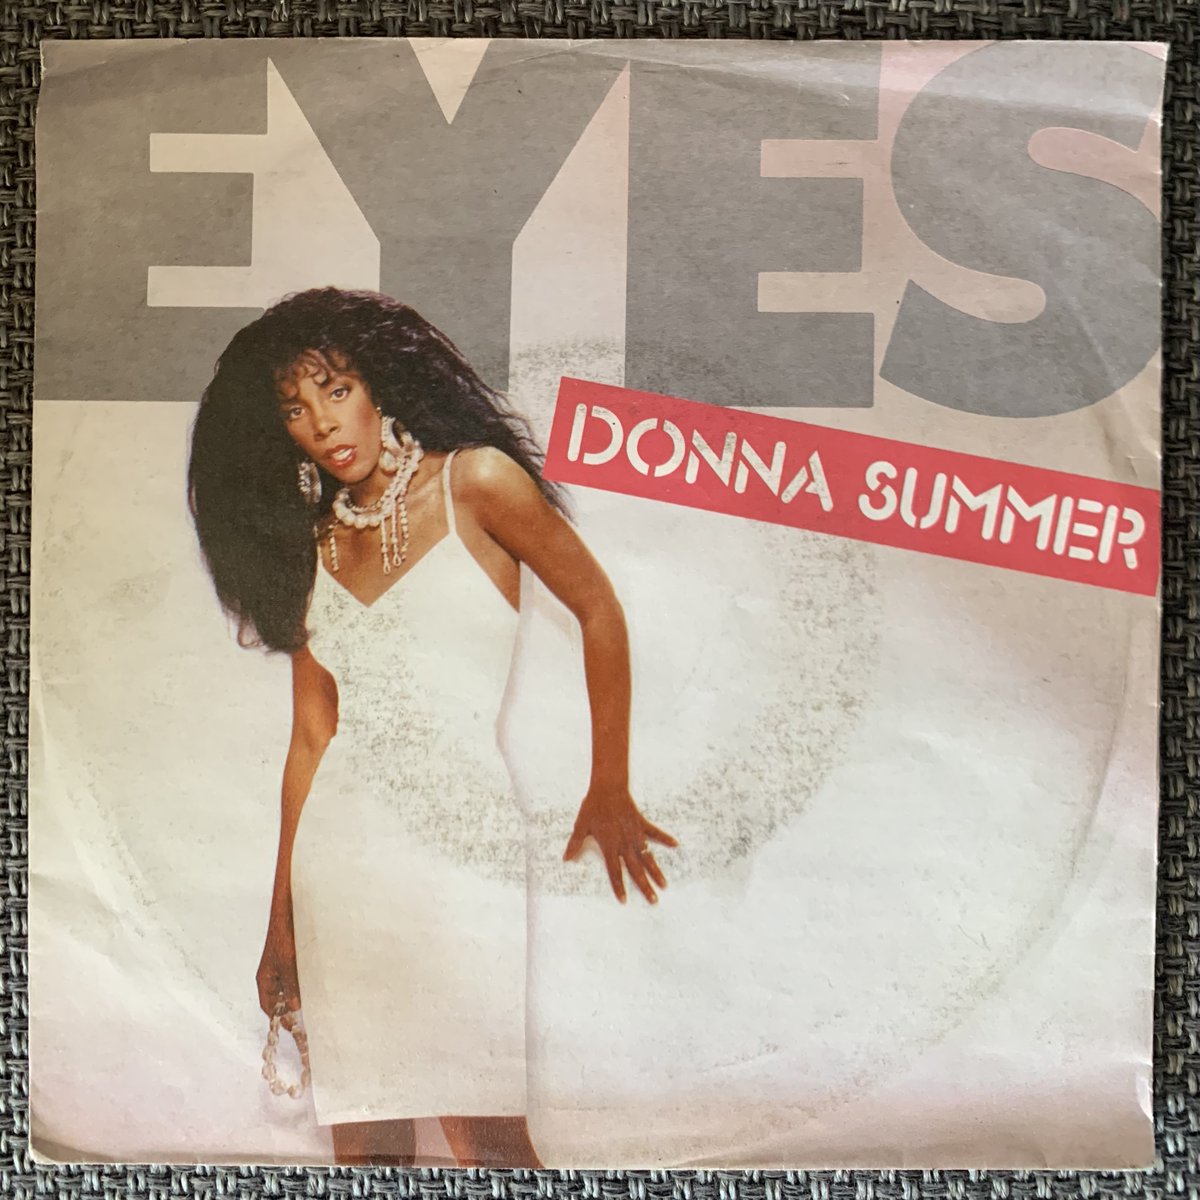 This was the third single from Donna Summer's 1984 album Cats Without Claws,  and was not a hit, unfortunately. The single was remixed by John 'Jellybean' Benitez. #jellybean #donnasummer #popjustice #retro #80s #pop #popmusic #singlescollection #treasurechest